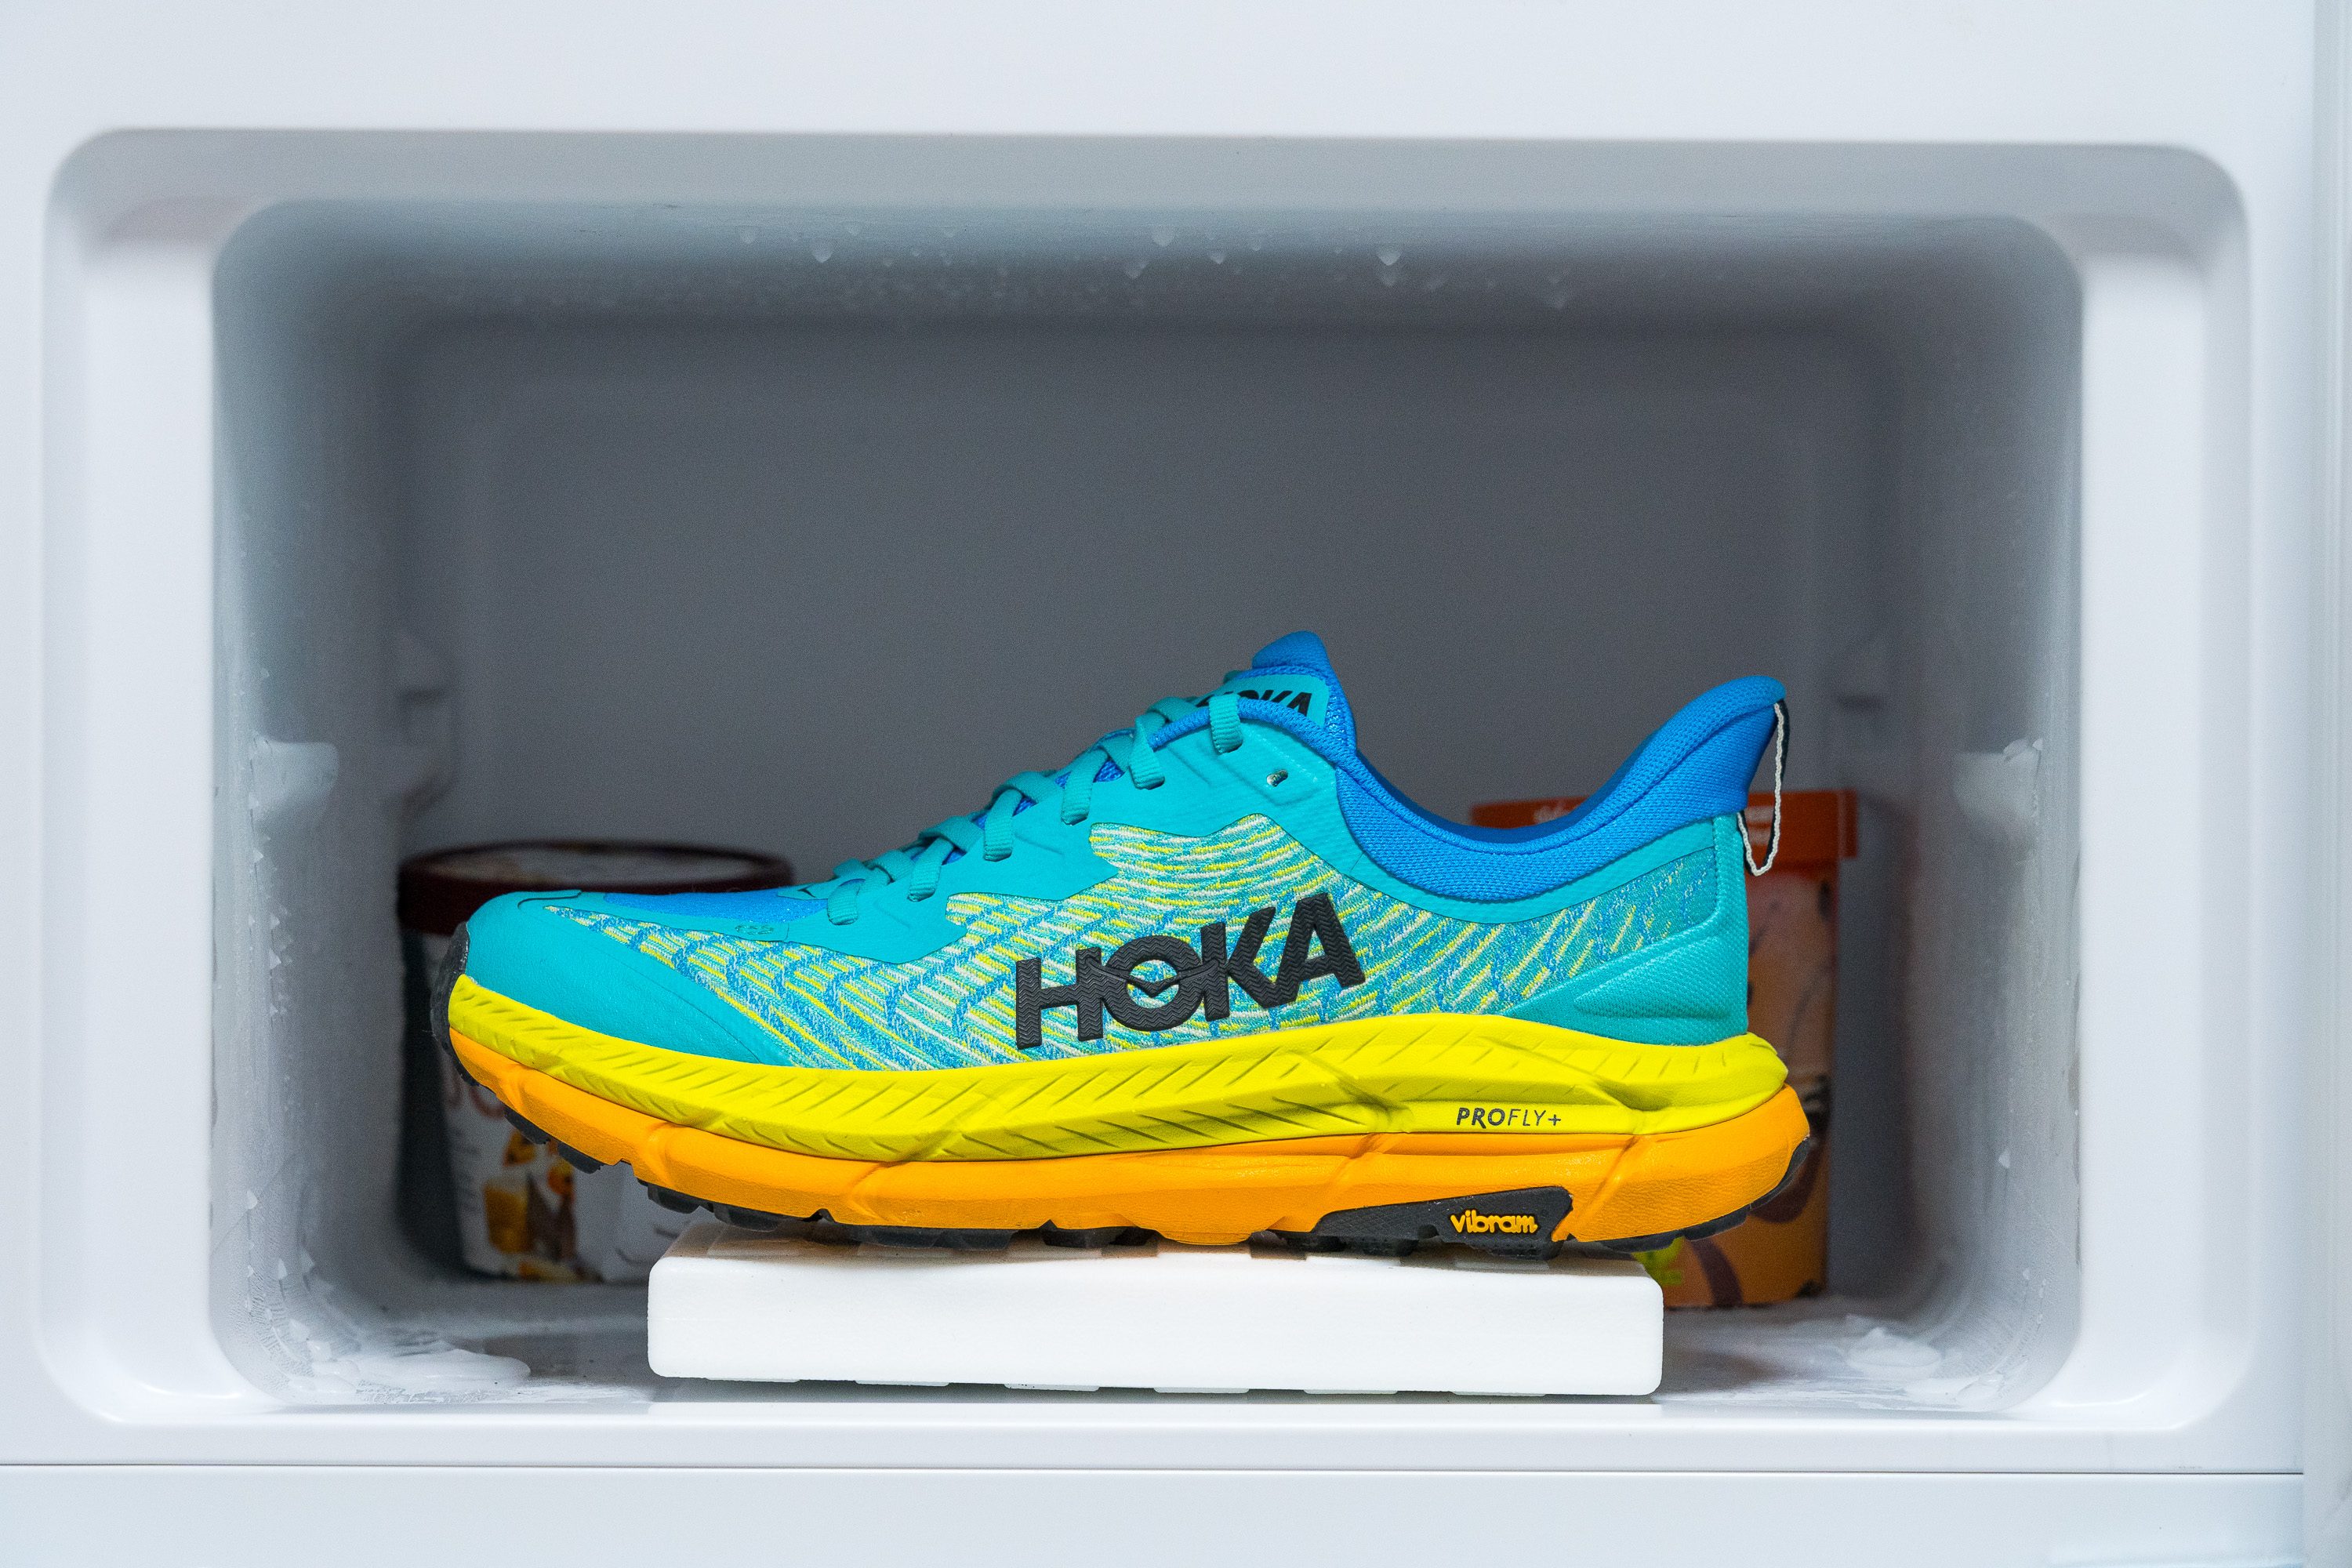 Hoka womens hoka one one elevon Difference in midsole softness in cold